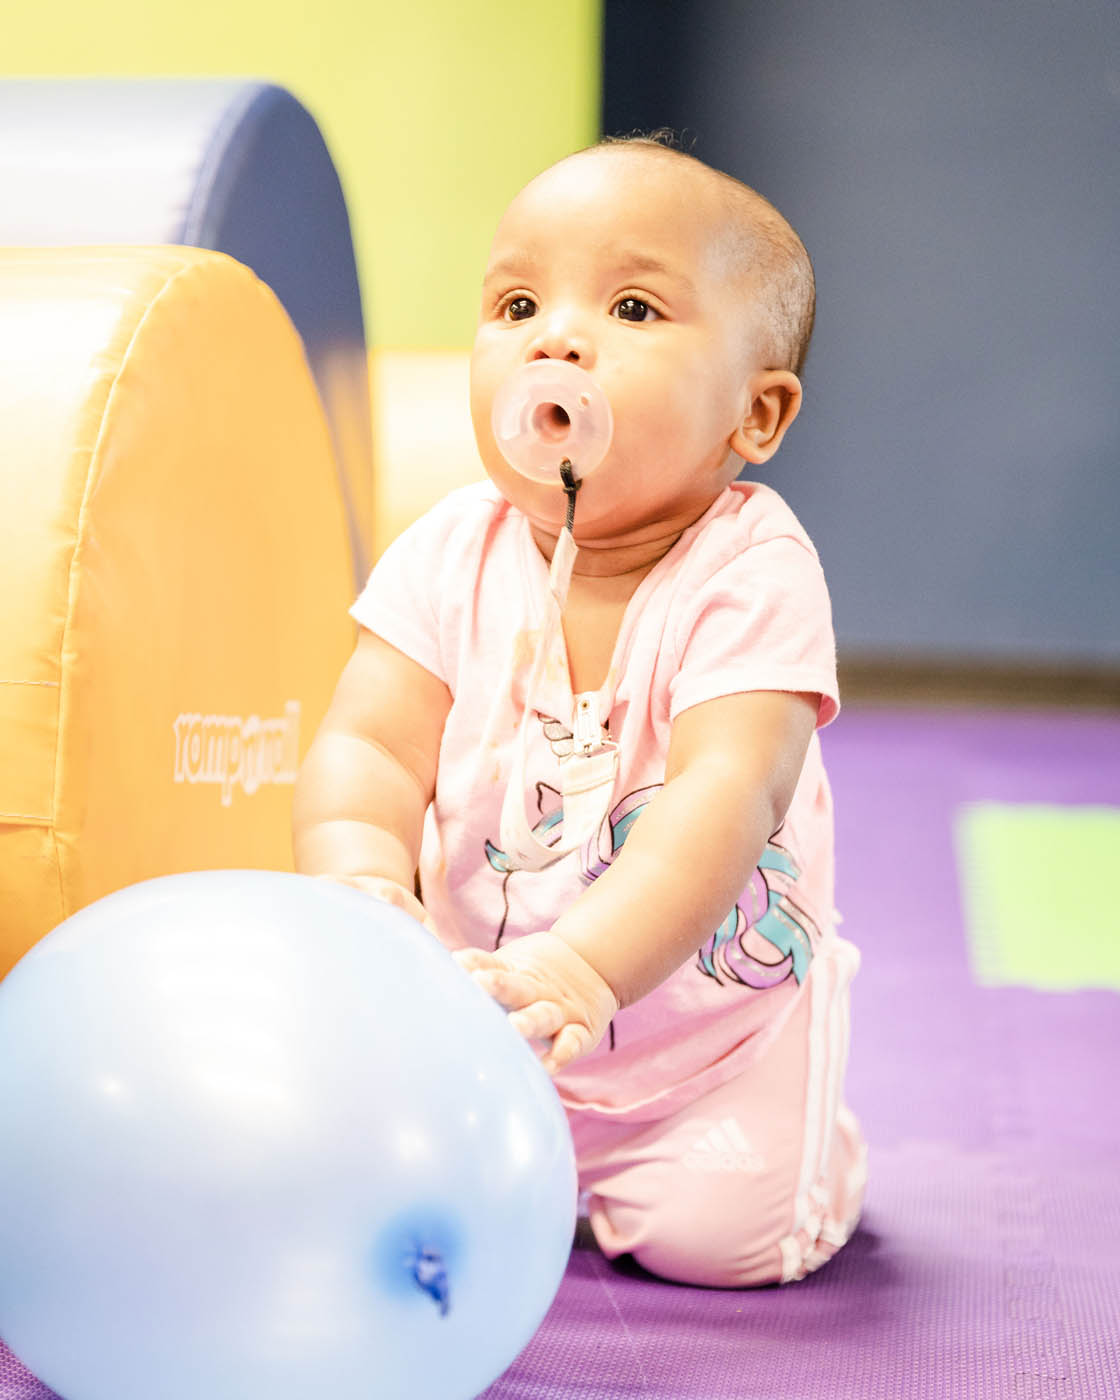 A baby in a gym class working on basic motor skills and enjoying playing with a blue ball - Romp n' Roll in Midlothian.